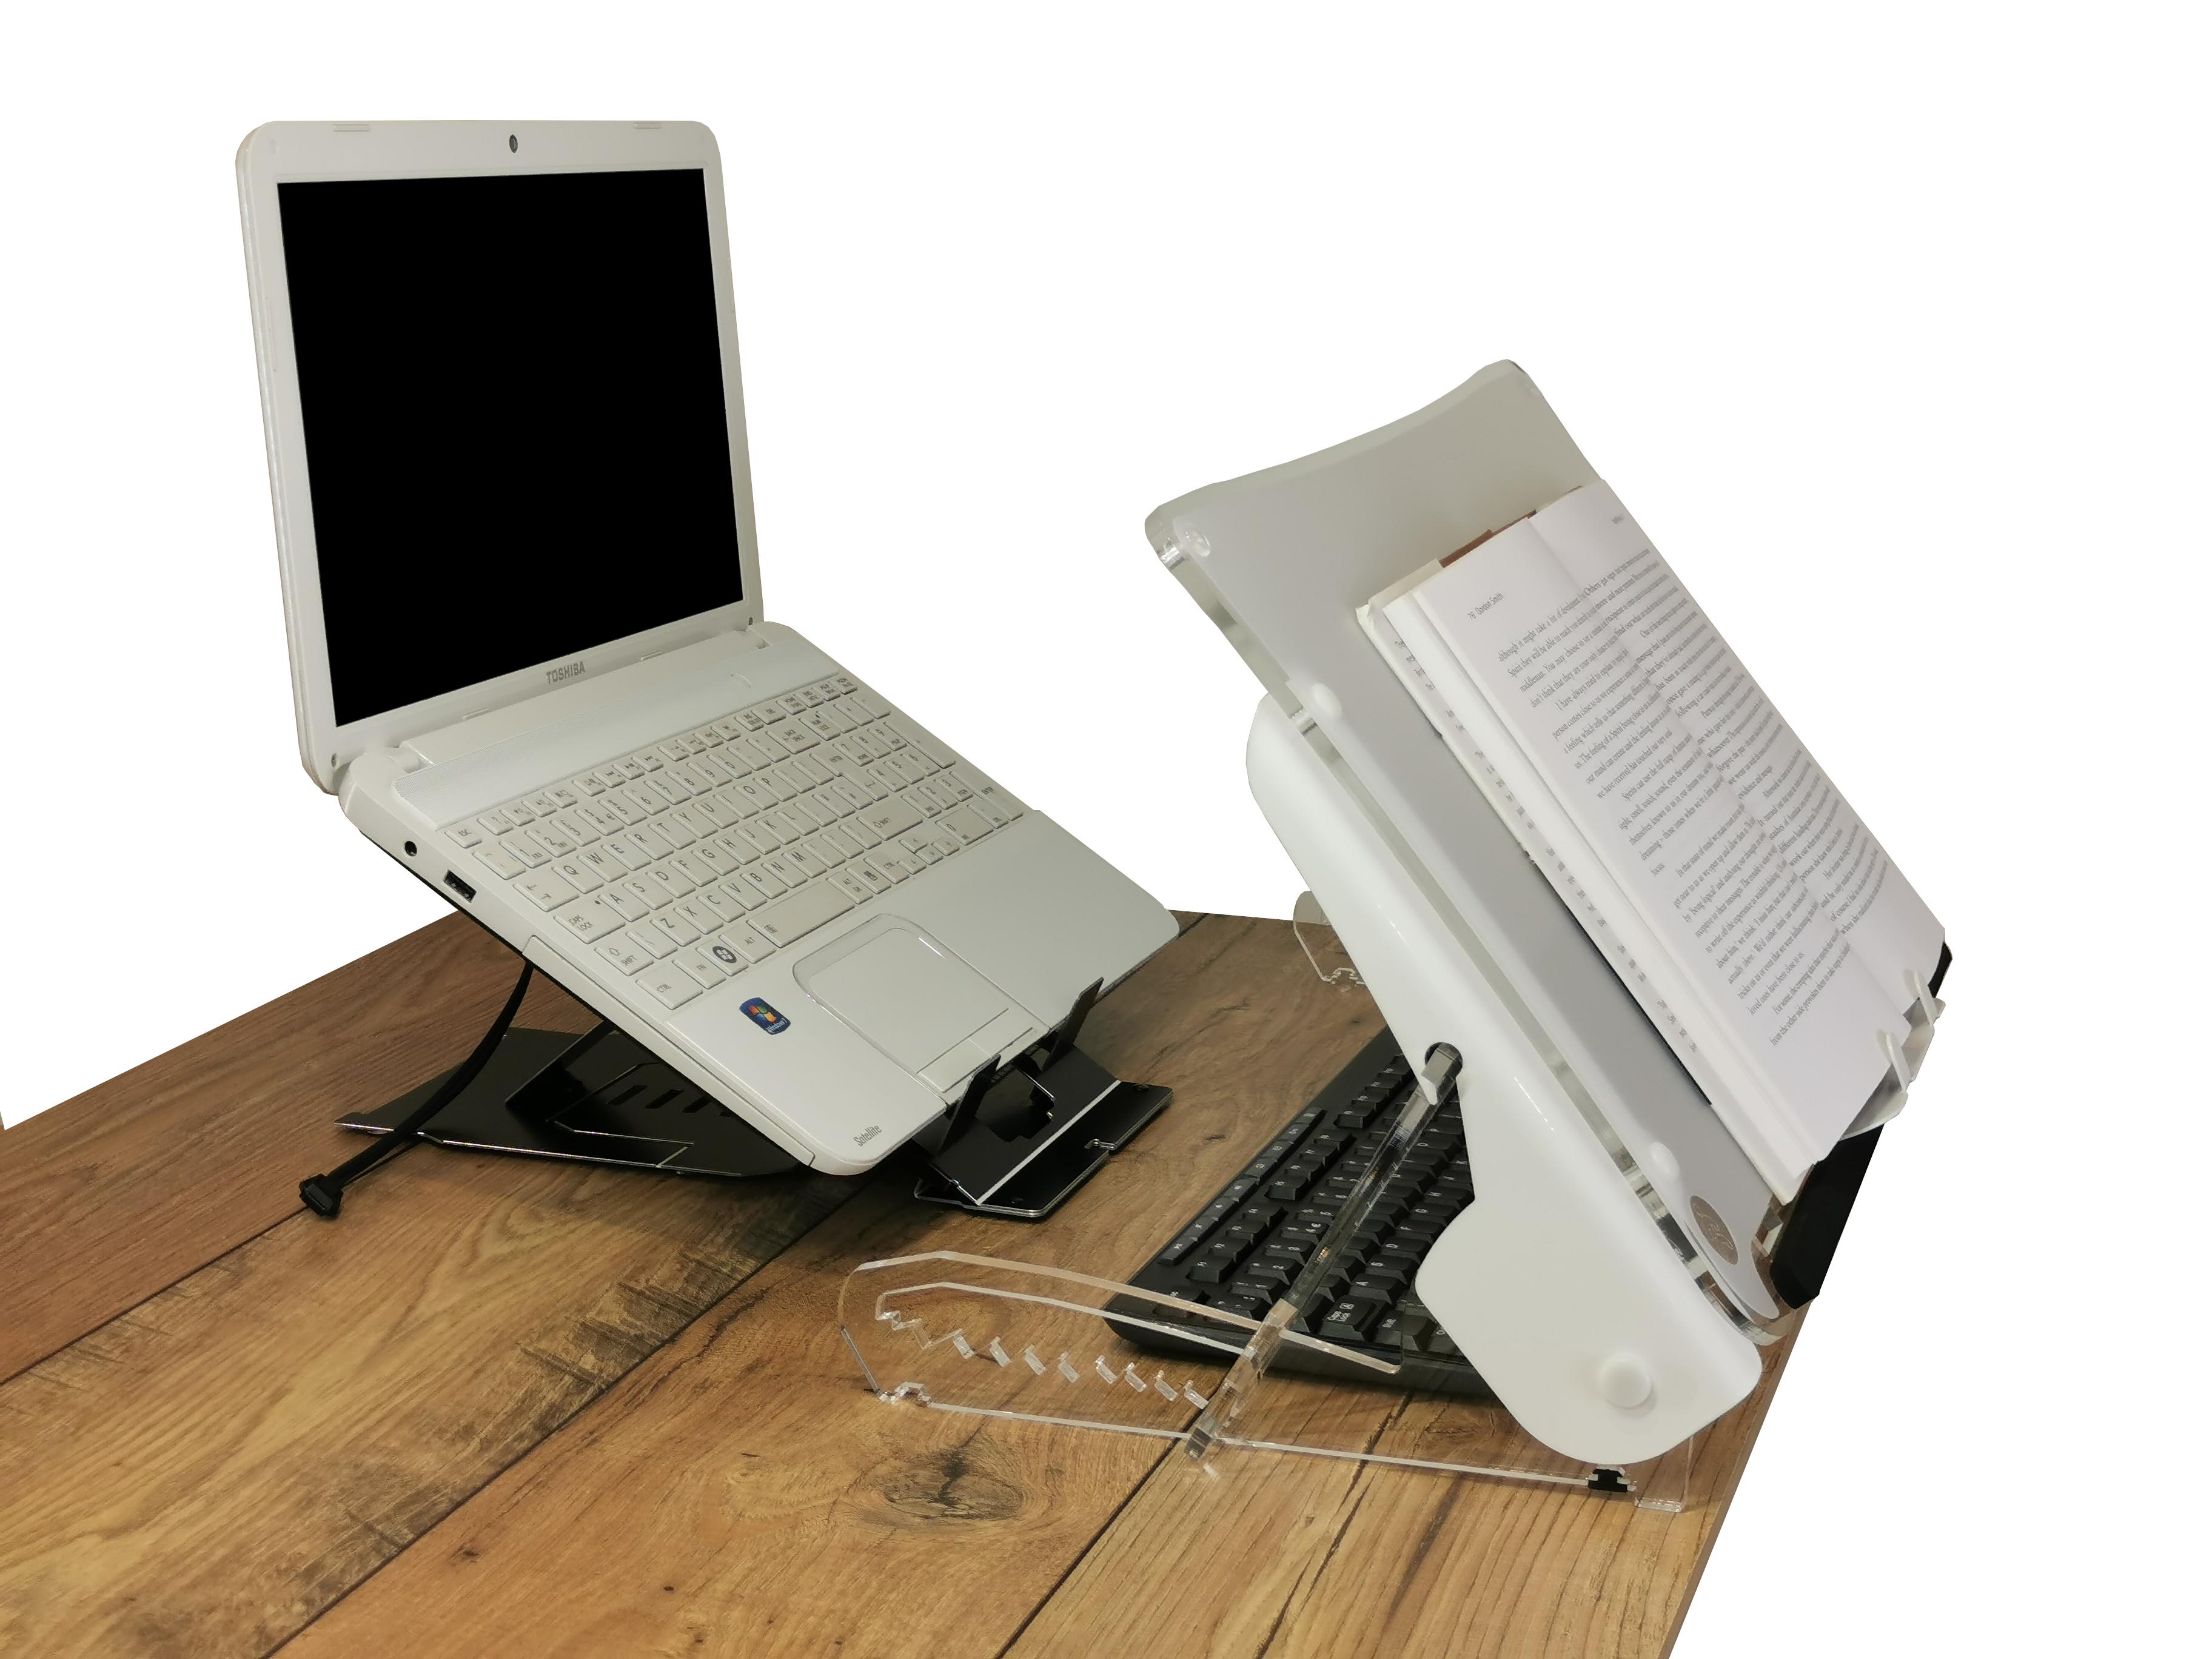 Clear Slope Pro Document Holder pulled forward on a desk over a keyboard with a book on the clear slope pro at it's highest position, there is a laptop on the desk